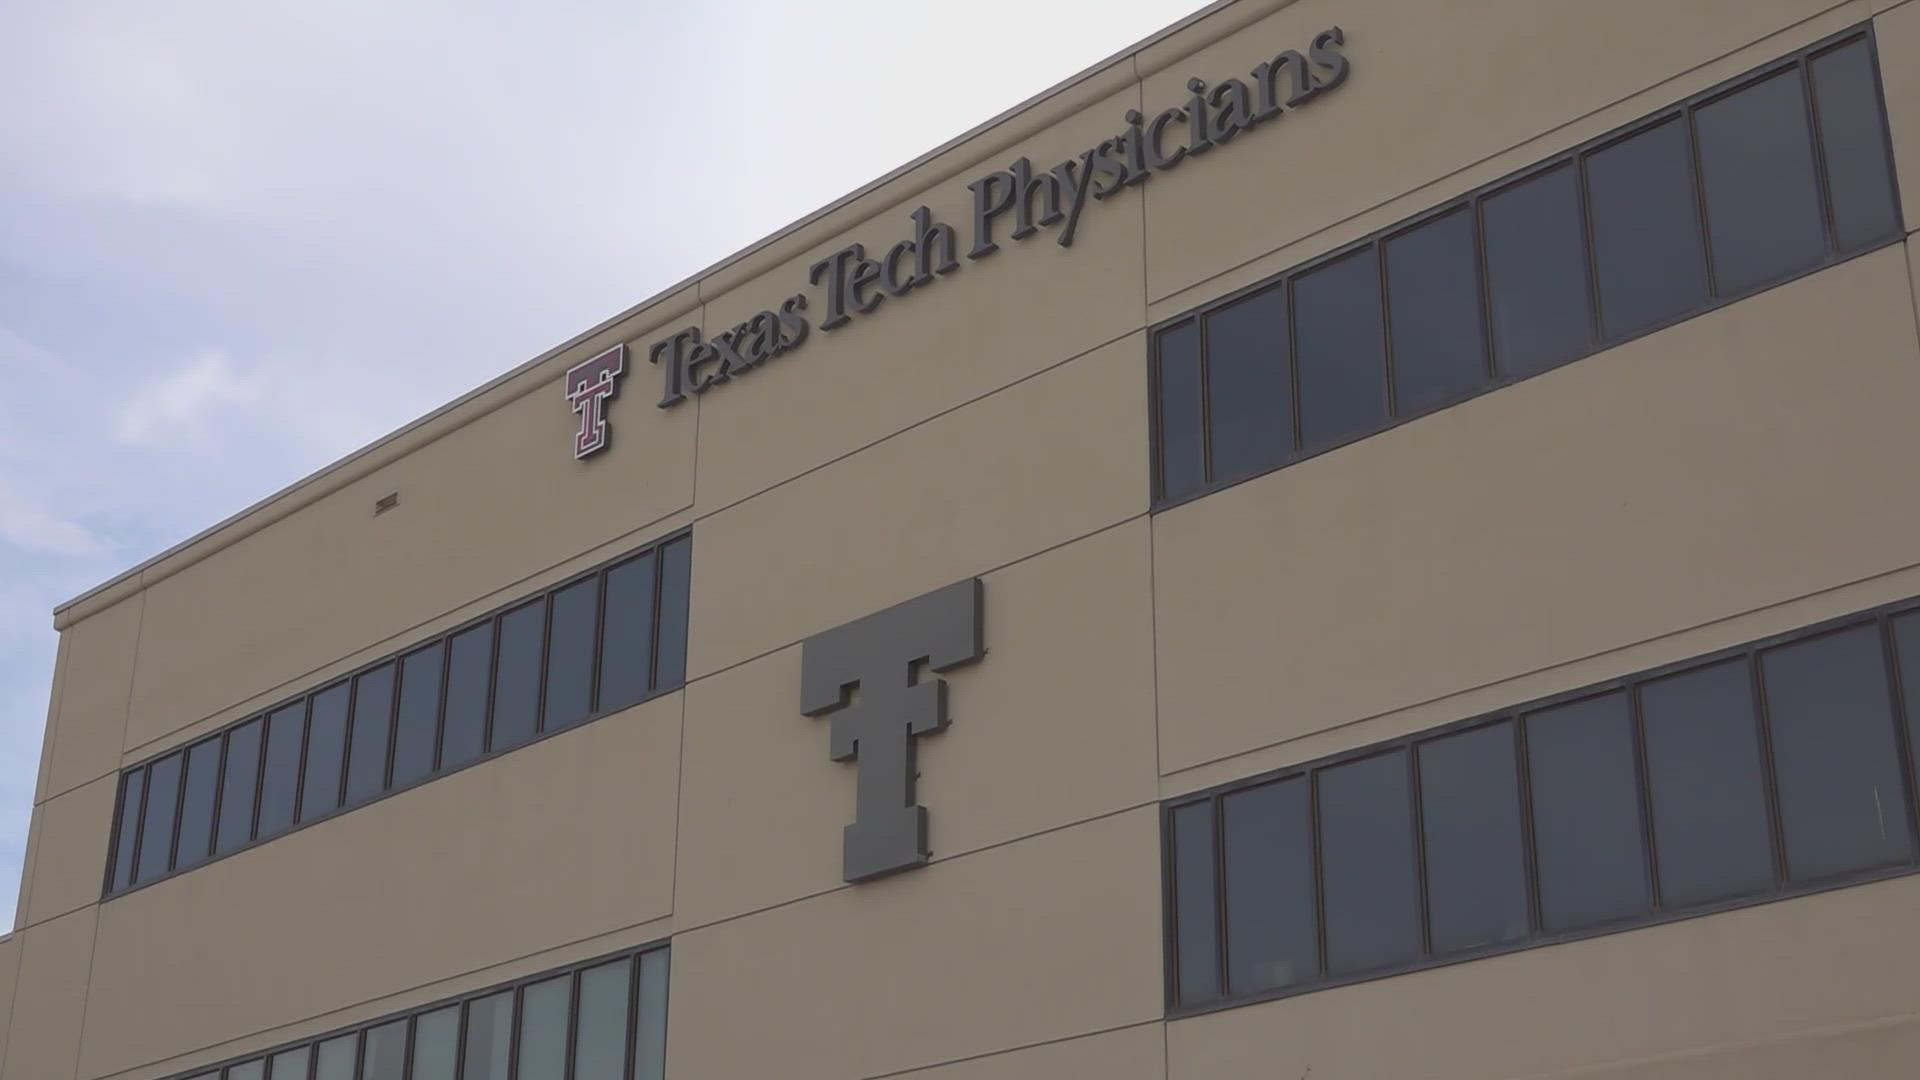 The Texas Tech University Health Sciences Center was the venue for meetings on Thursday and Friday, with health care a topic of discussion, along with telehealth.